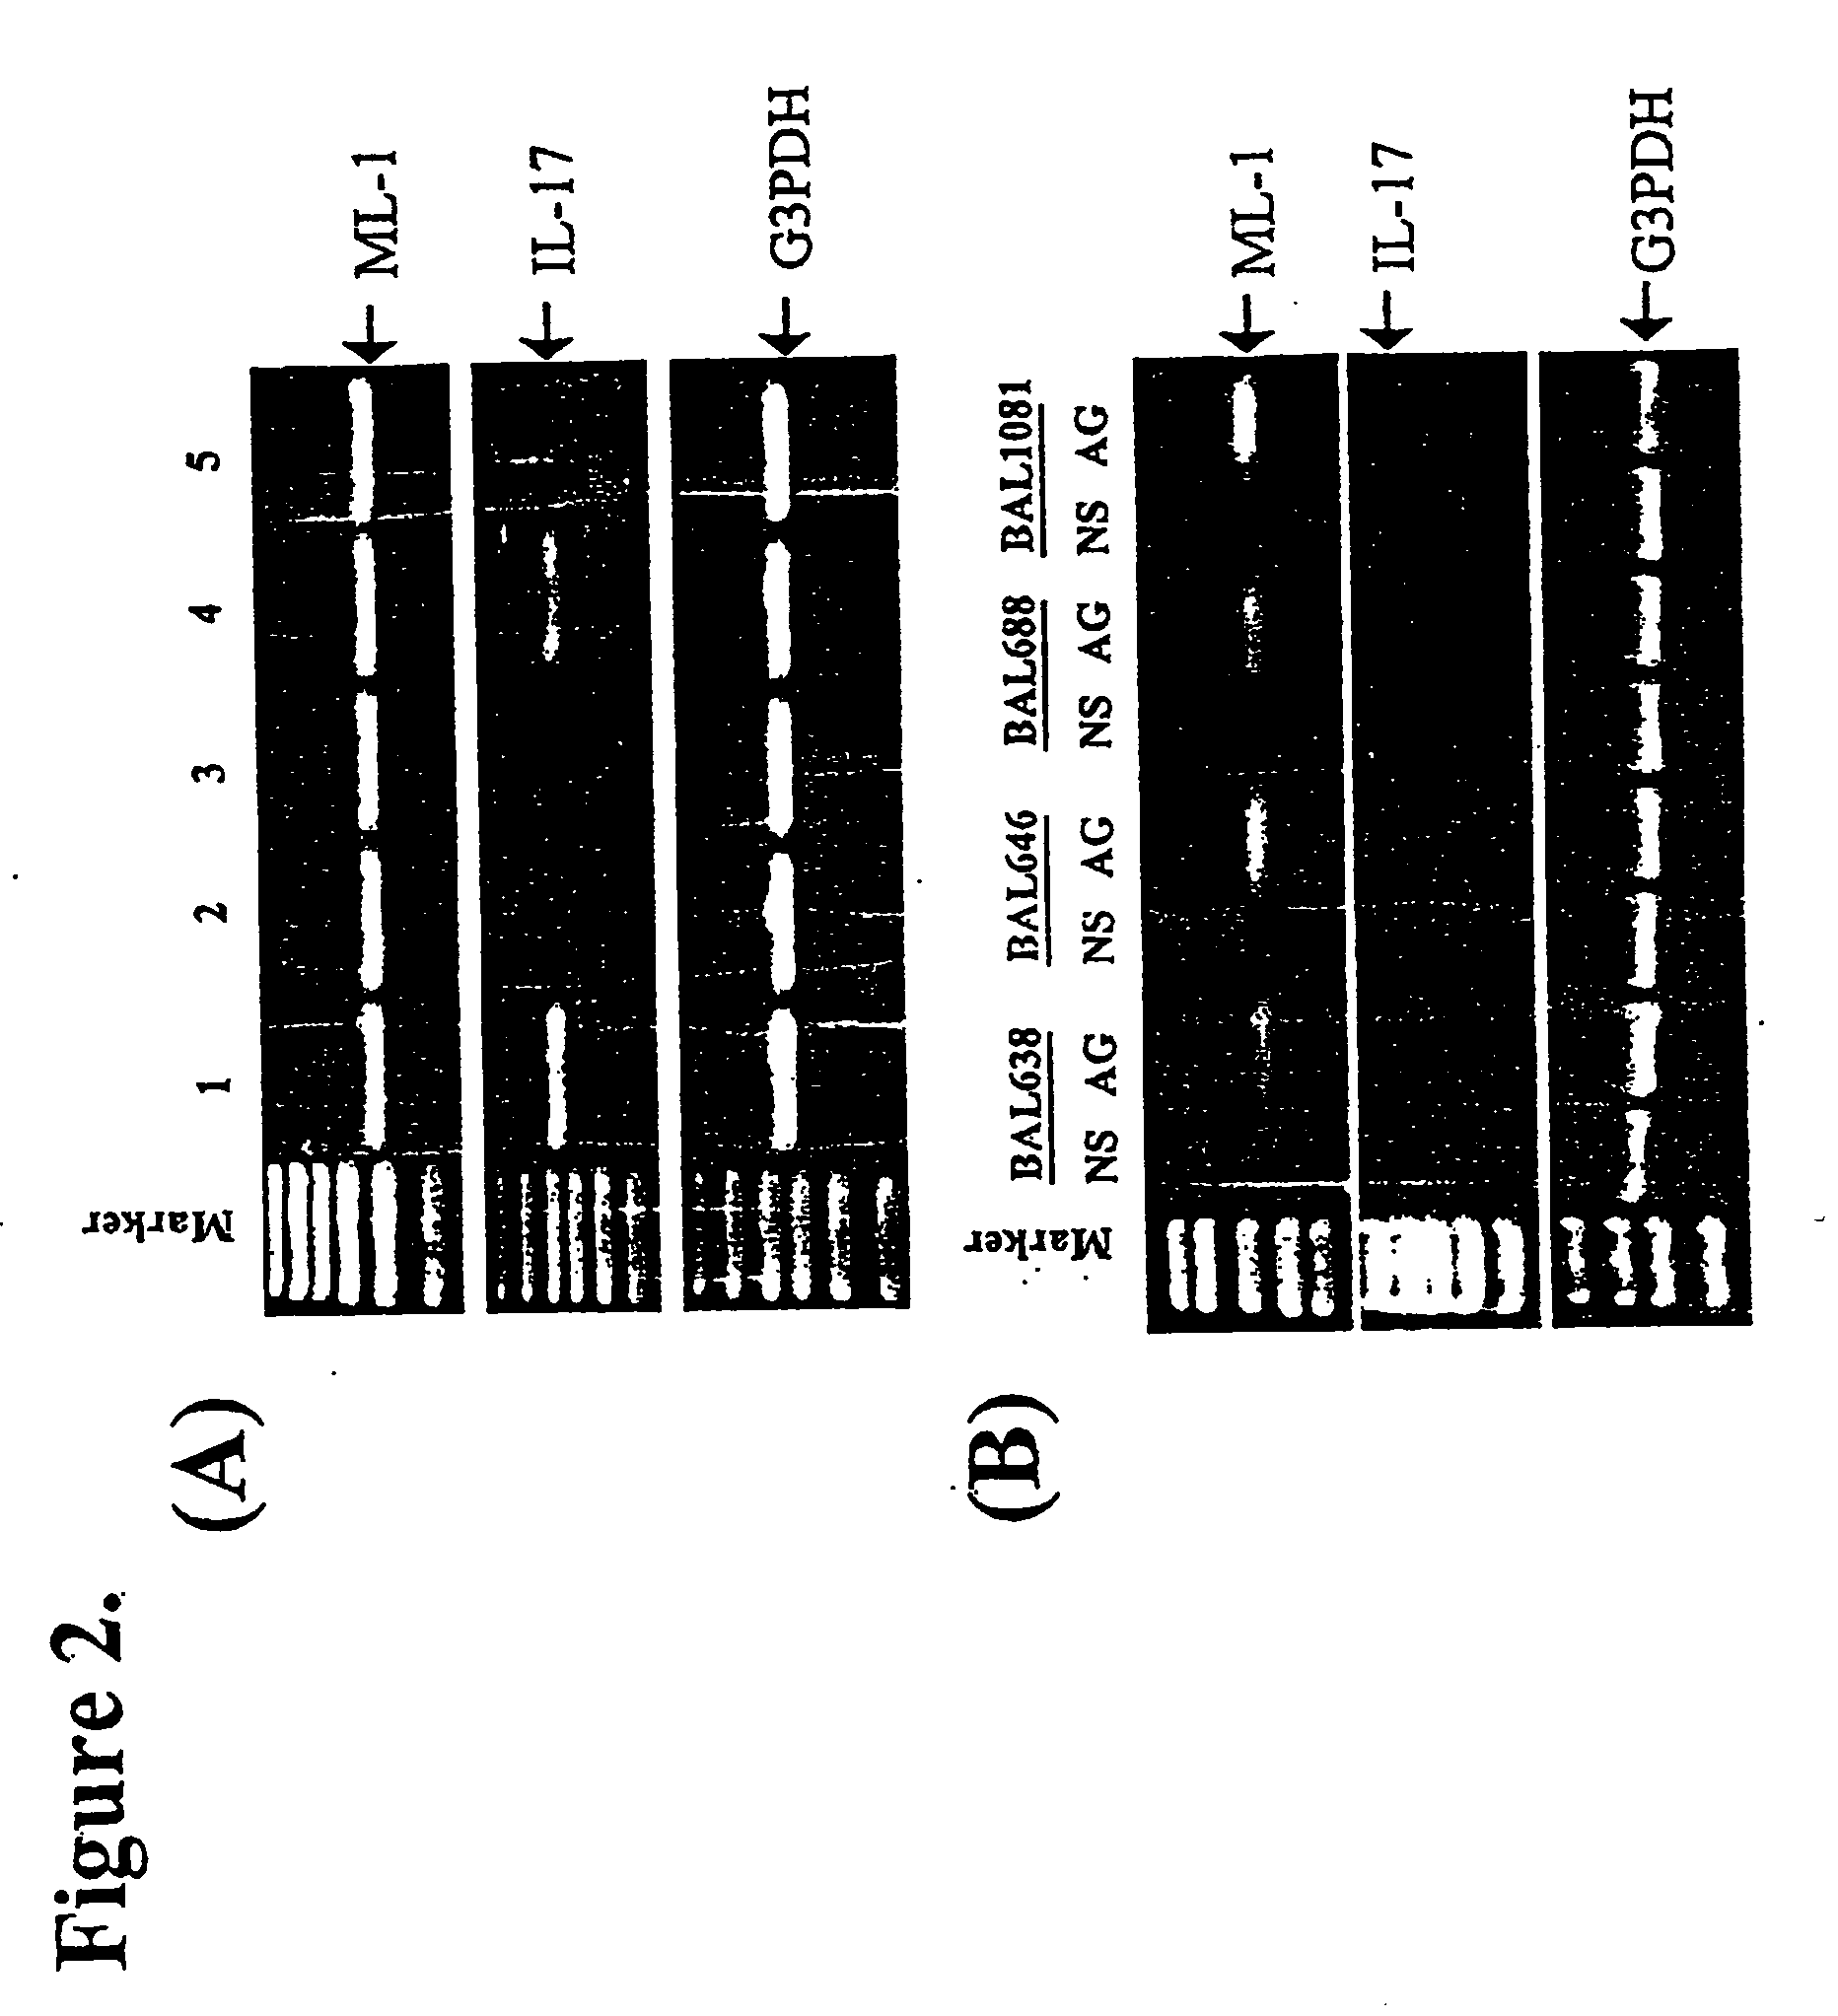 Cytokine structurally related to IL-17